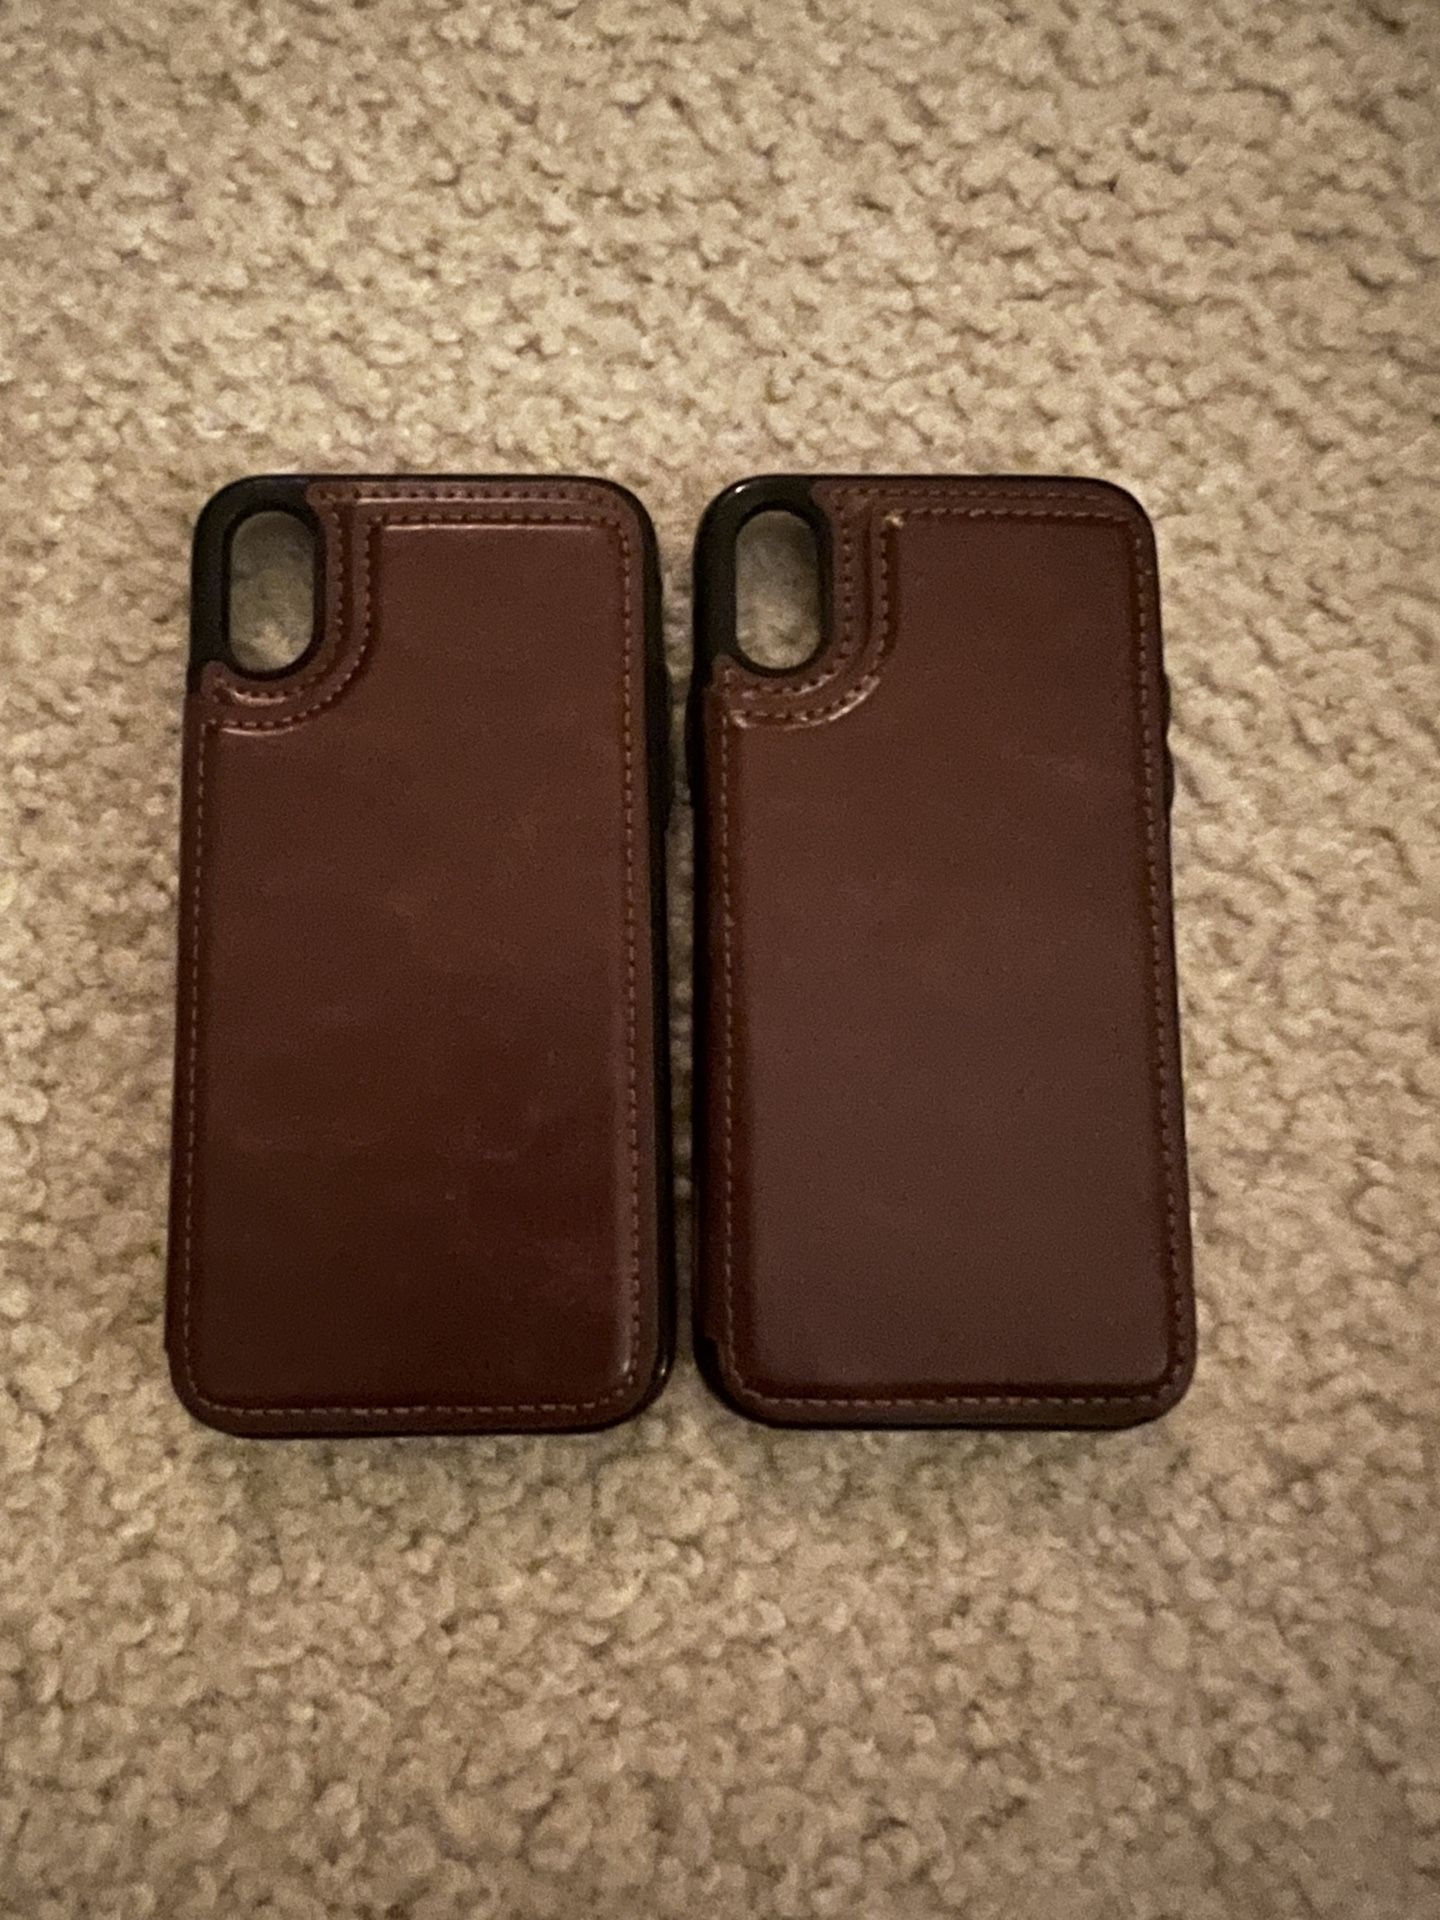 iPhone X/XS Leather Phone Case 